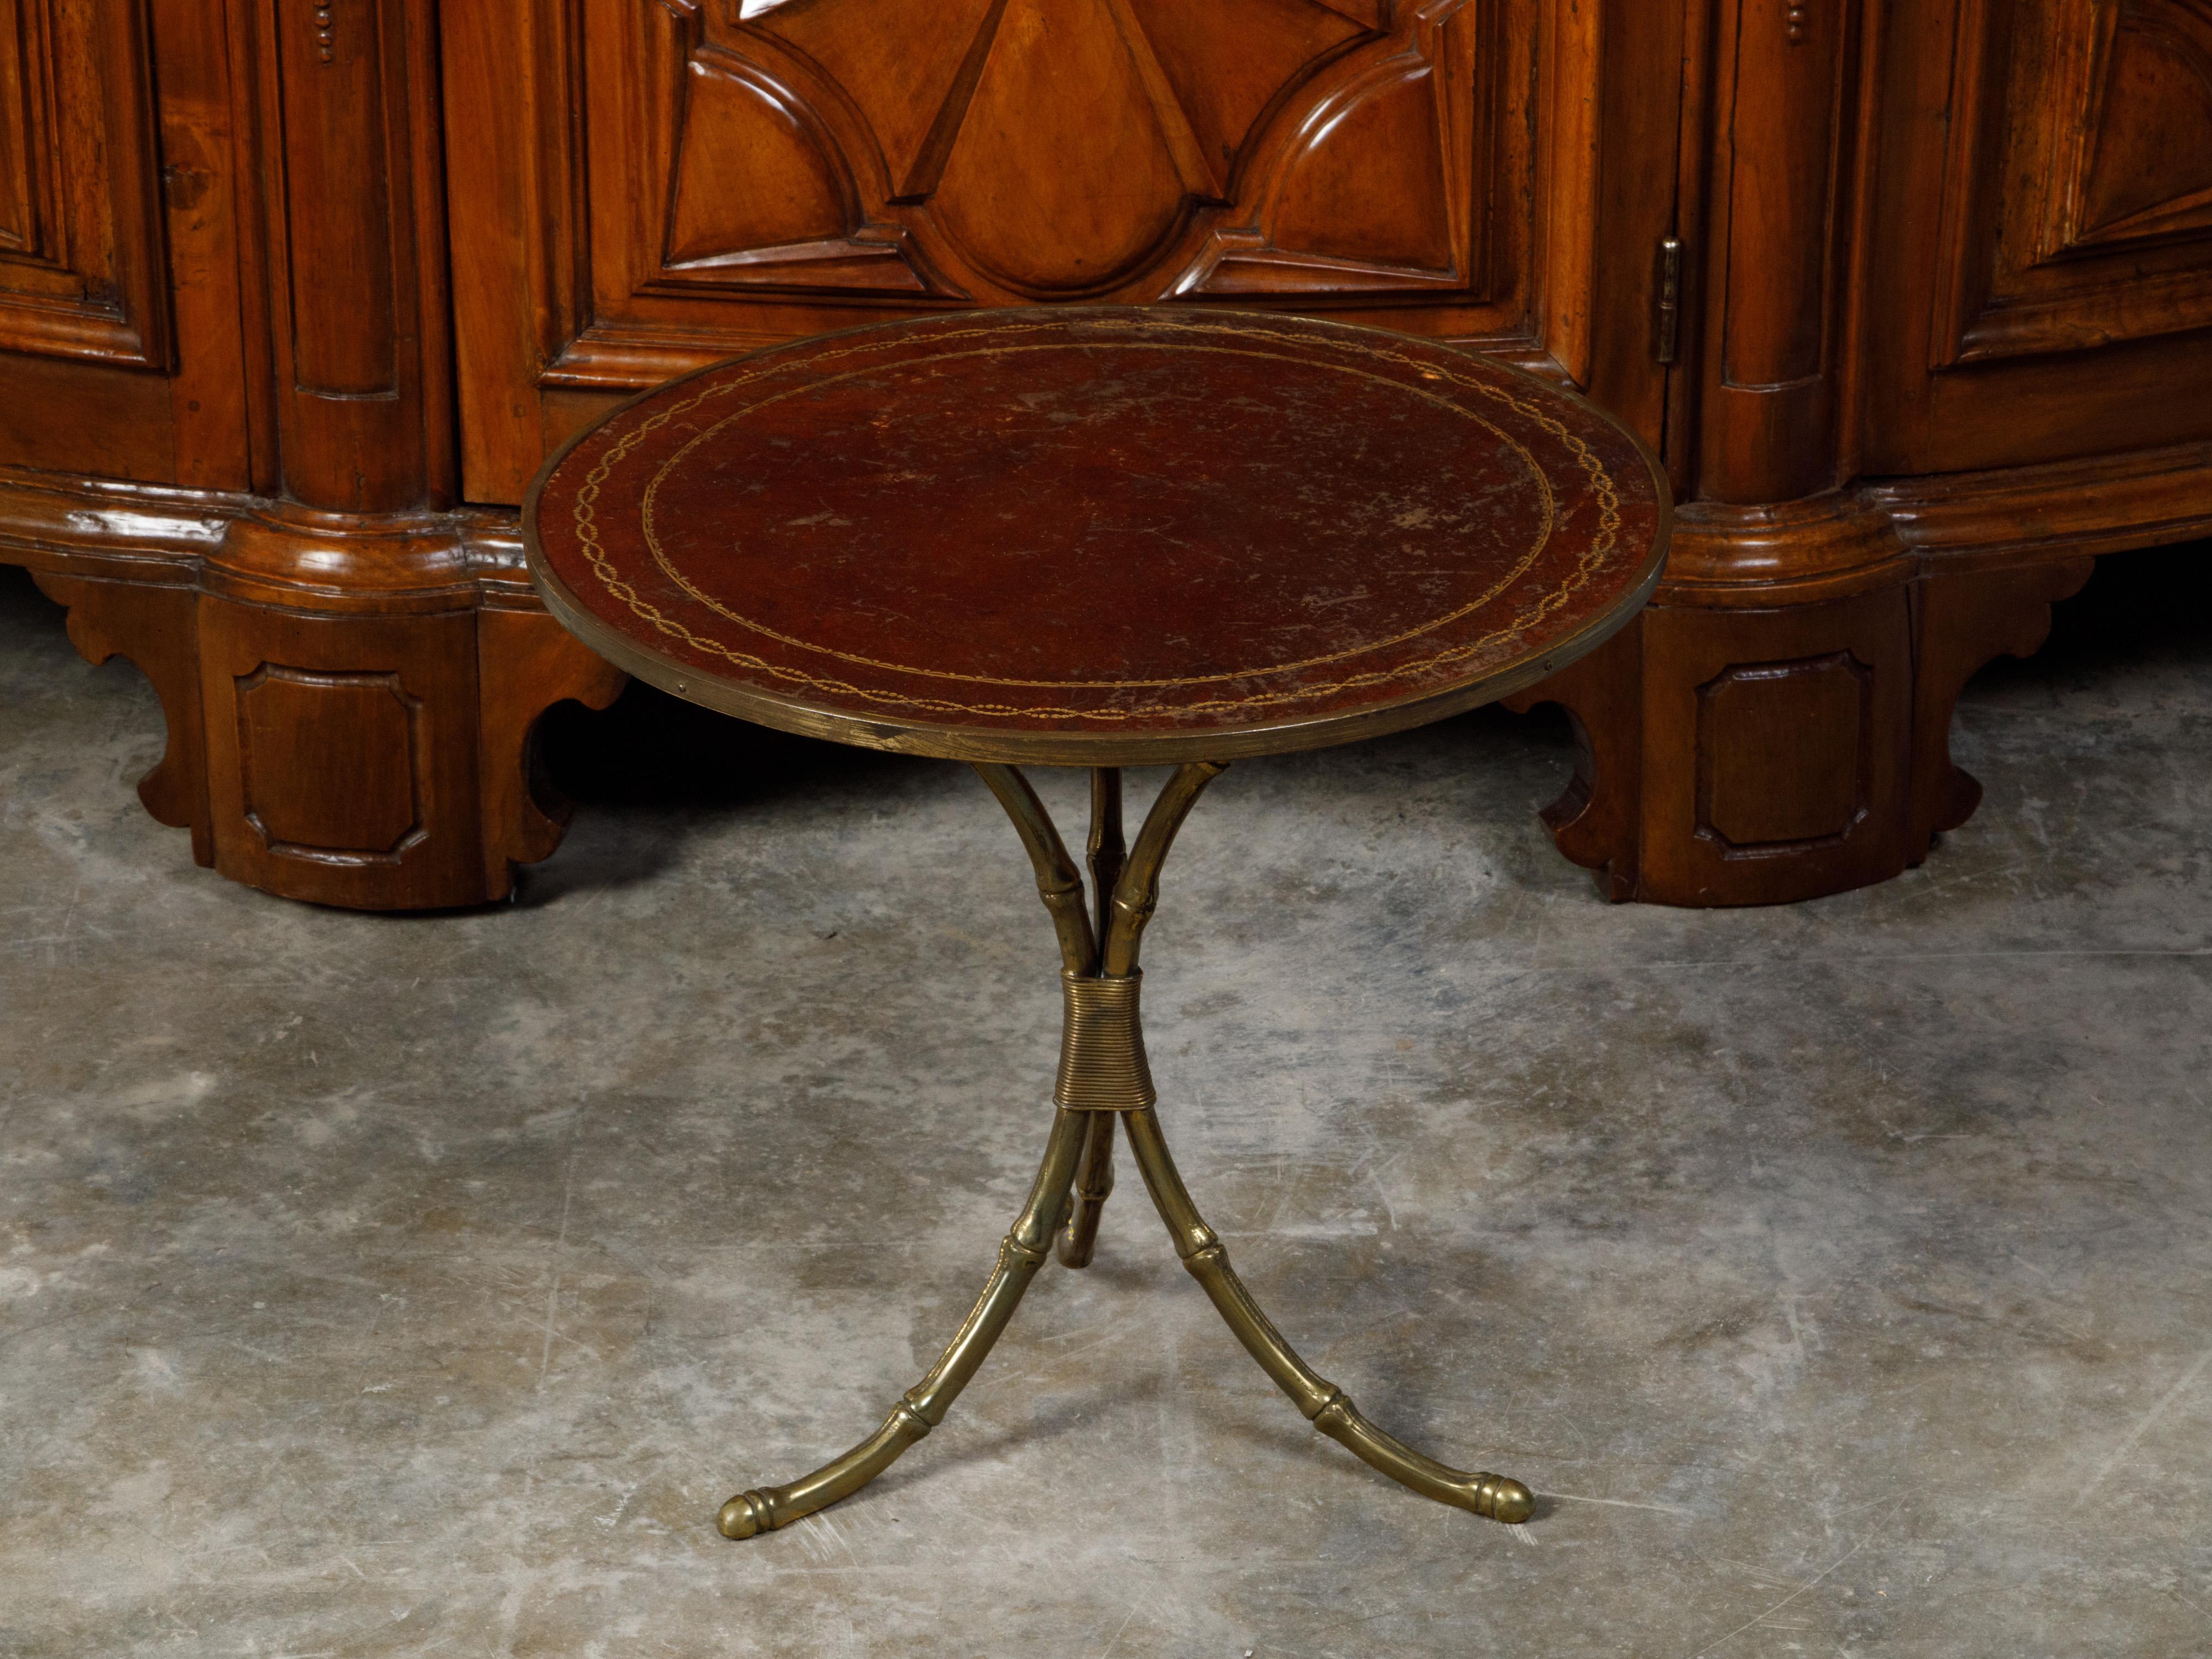 A French Maison Jansen brass side table from the mid 20th century, with leather top. Created in France during the Midcentury period, this Maison Jansen table features a circular brown leather top with gilt motifs, sitting above a faux bamboo brass